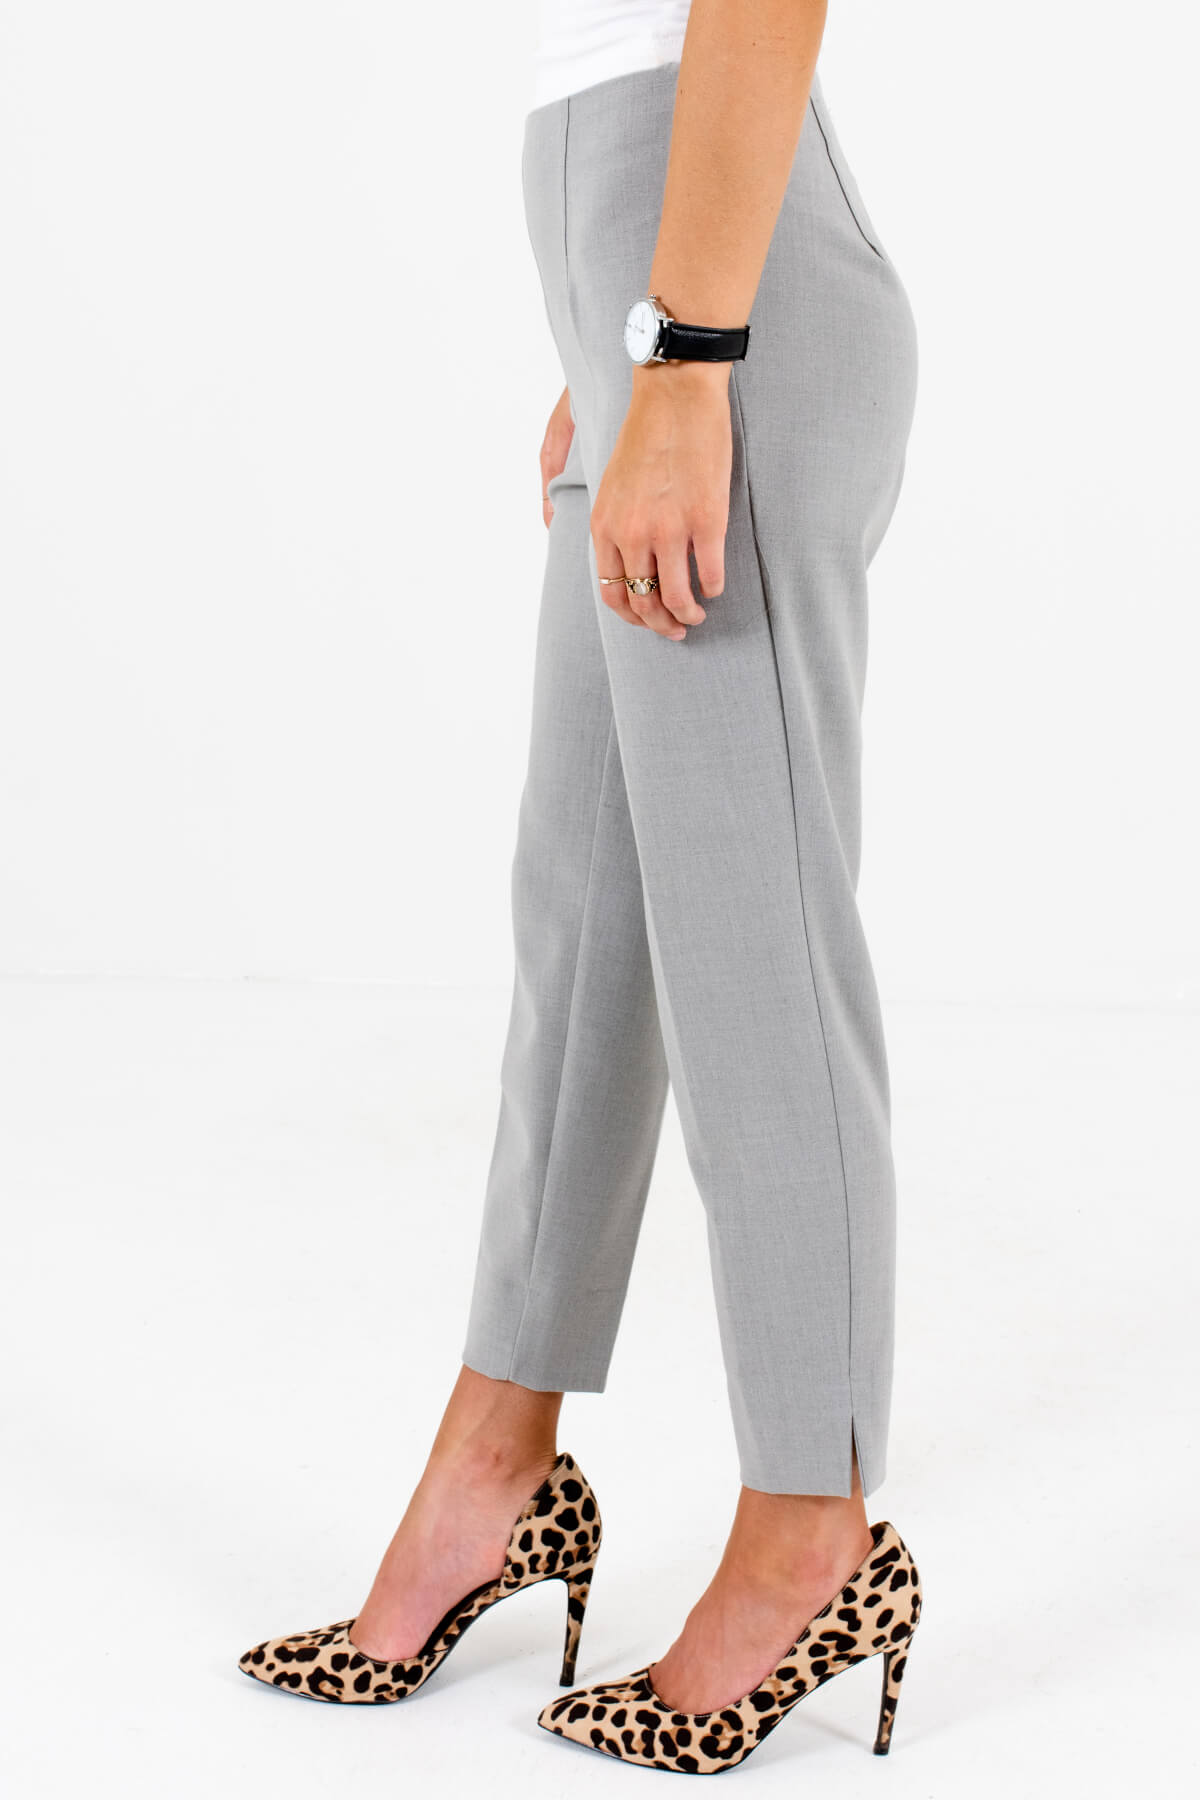 Heather Gray High-Quality Boutique Slack Style Pants for Women